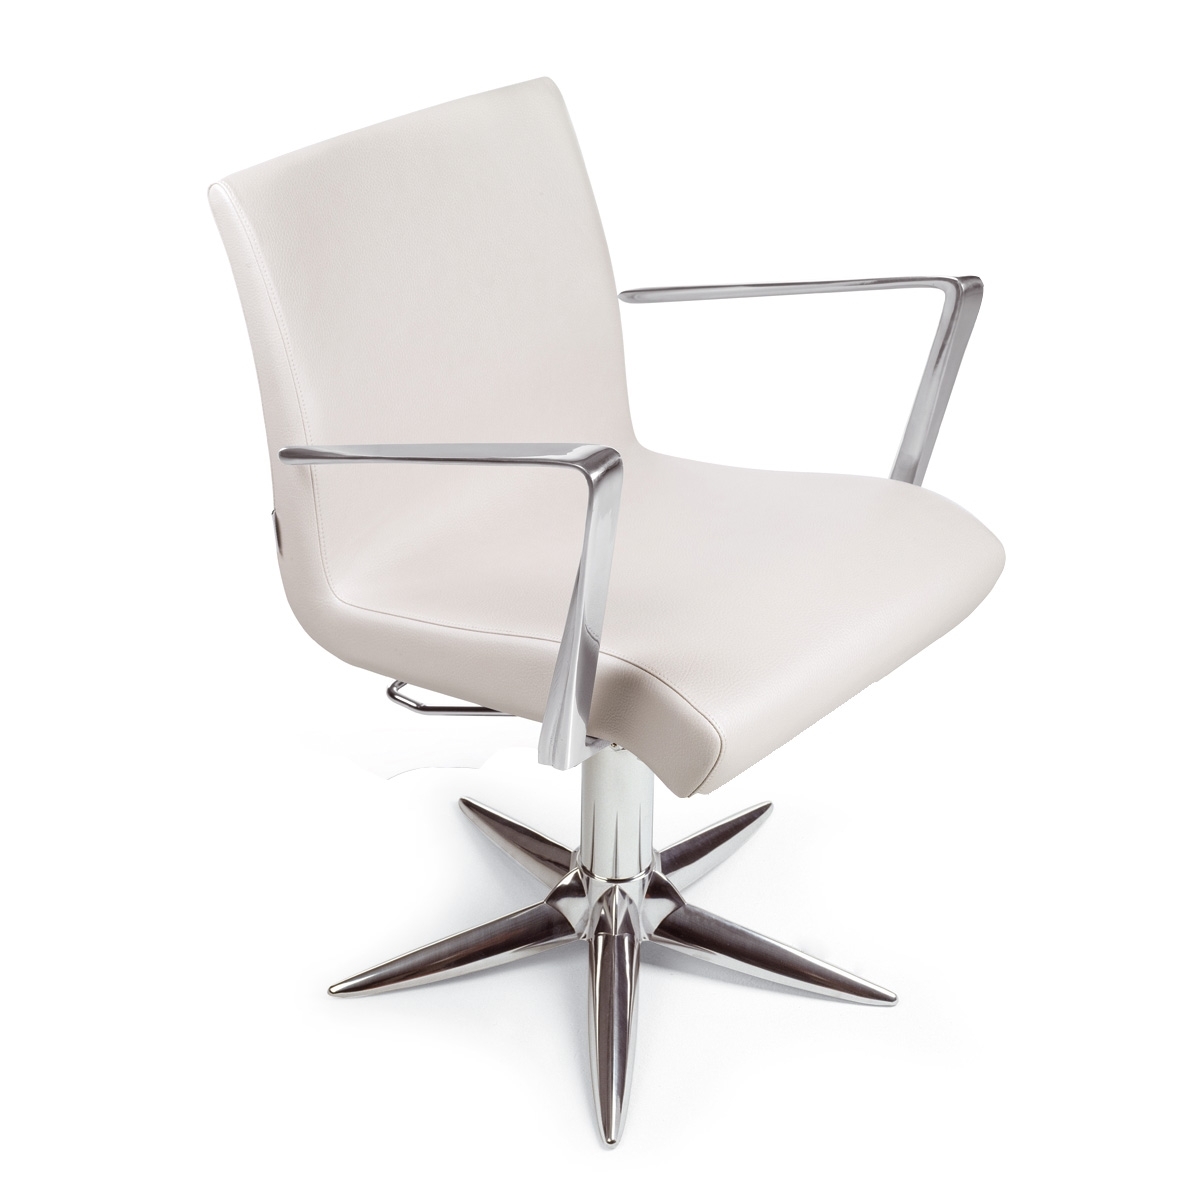 Aluotis P Styling Chair by Gamma & Bross Spa